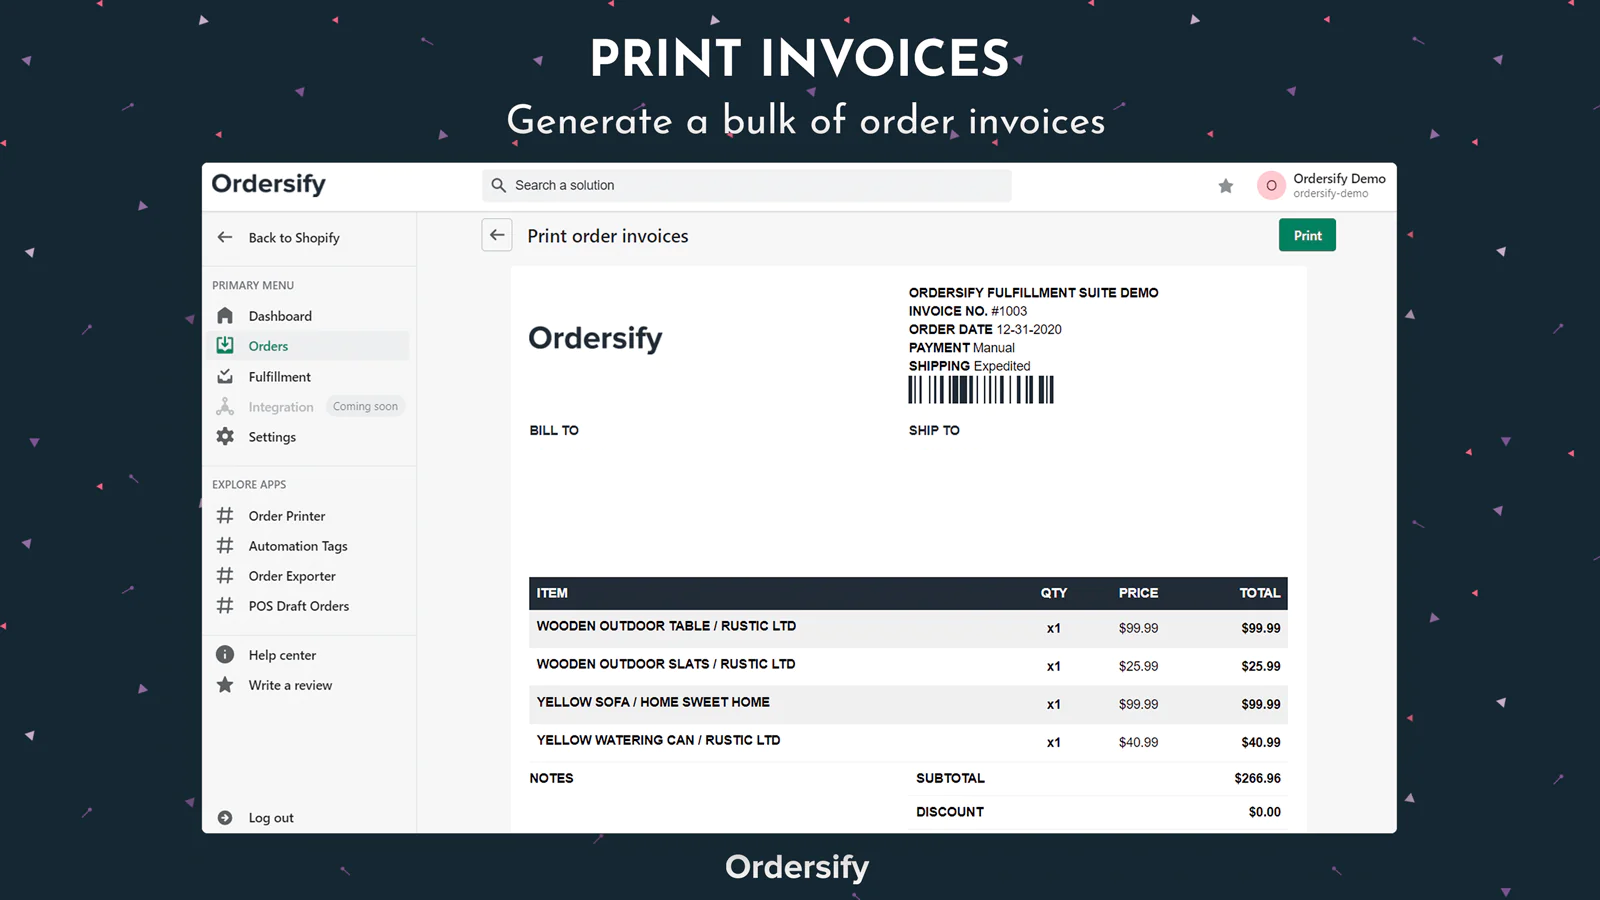 Print invoices - Generate a bulk of order invoices